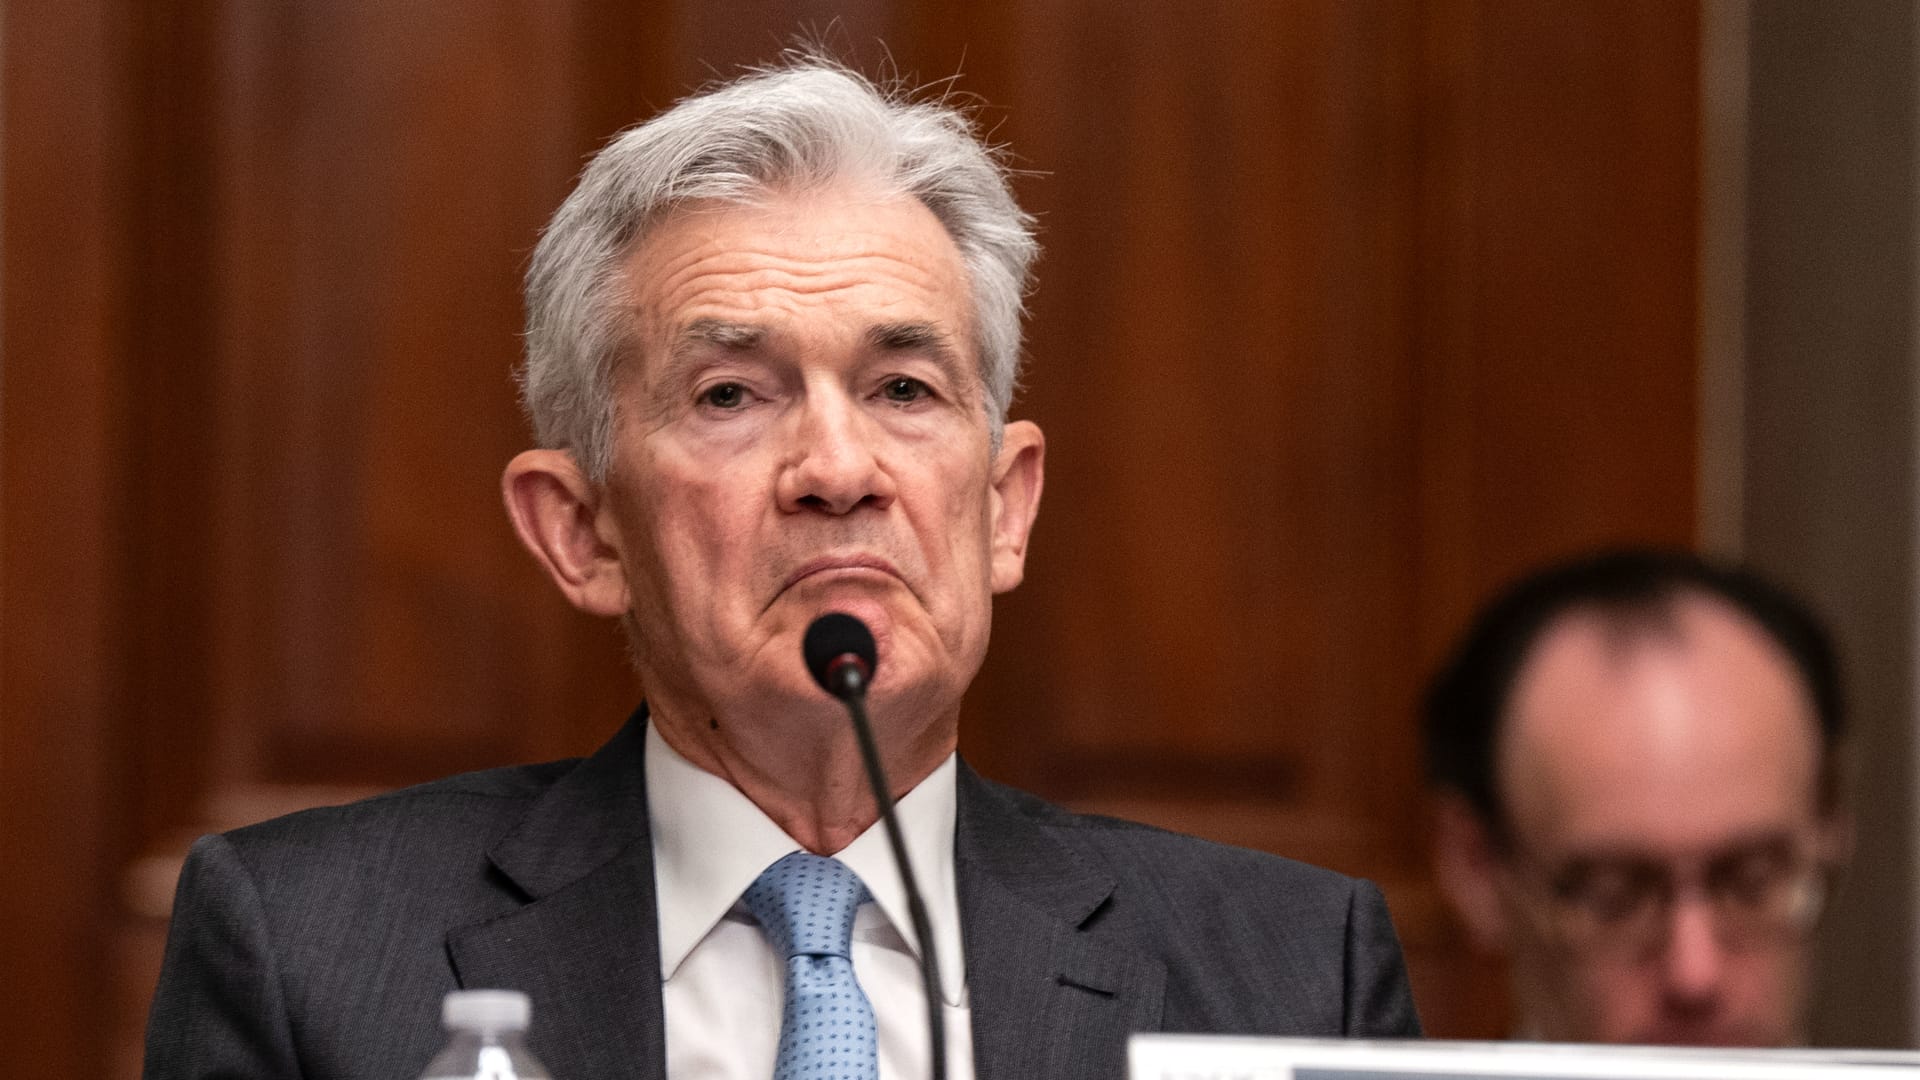 Fed Chair Powell says inflation has been higher than thought